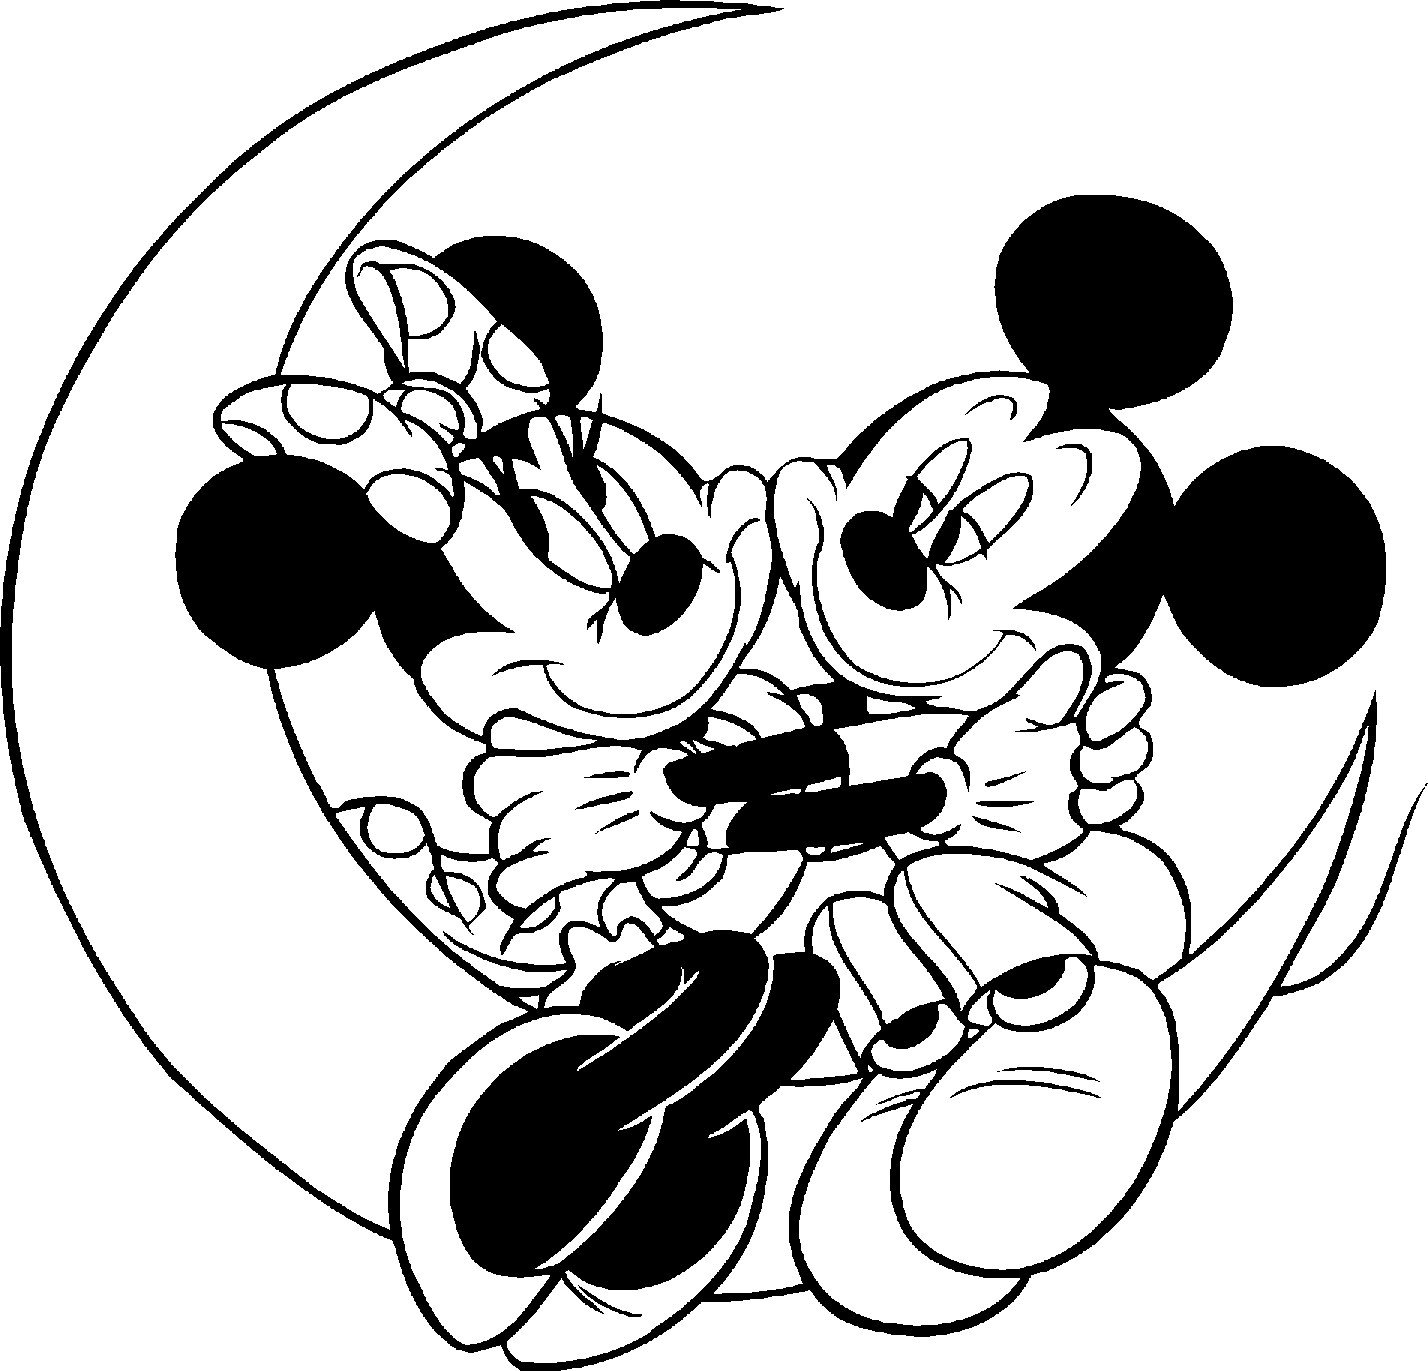 Mickey And Minnie Mouse Coloring Pages
 Minnie Mouse Coloring Pages To Print For Free